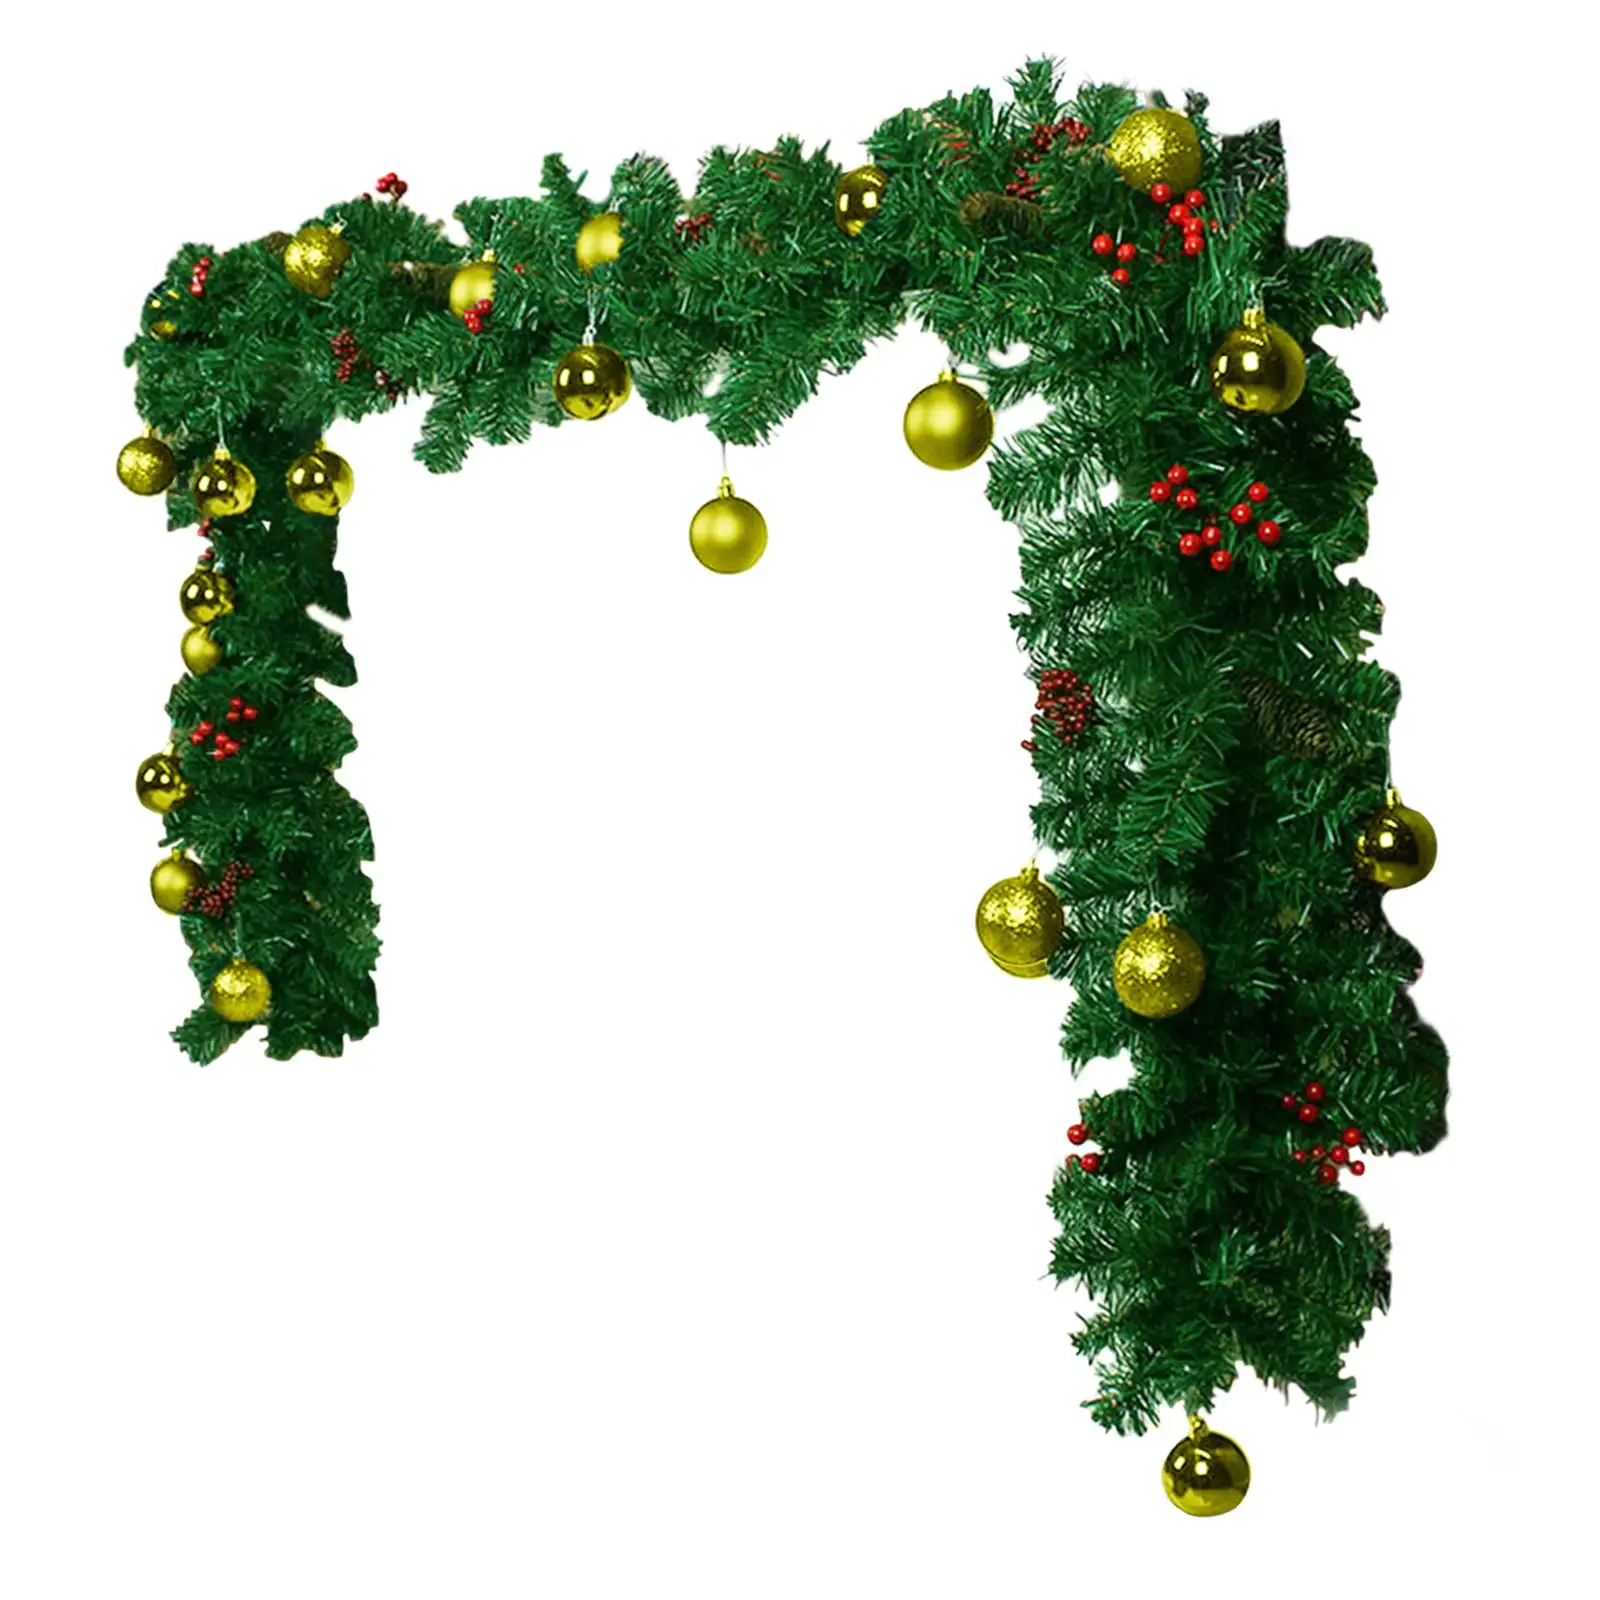 Christmas Garland Green Leaves Decorations Greenery Xmas Garland for Balcony Christmas Decor Door Display Home Stairs Garden